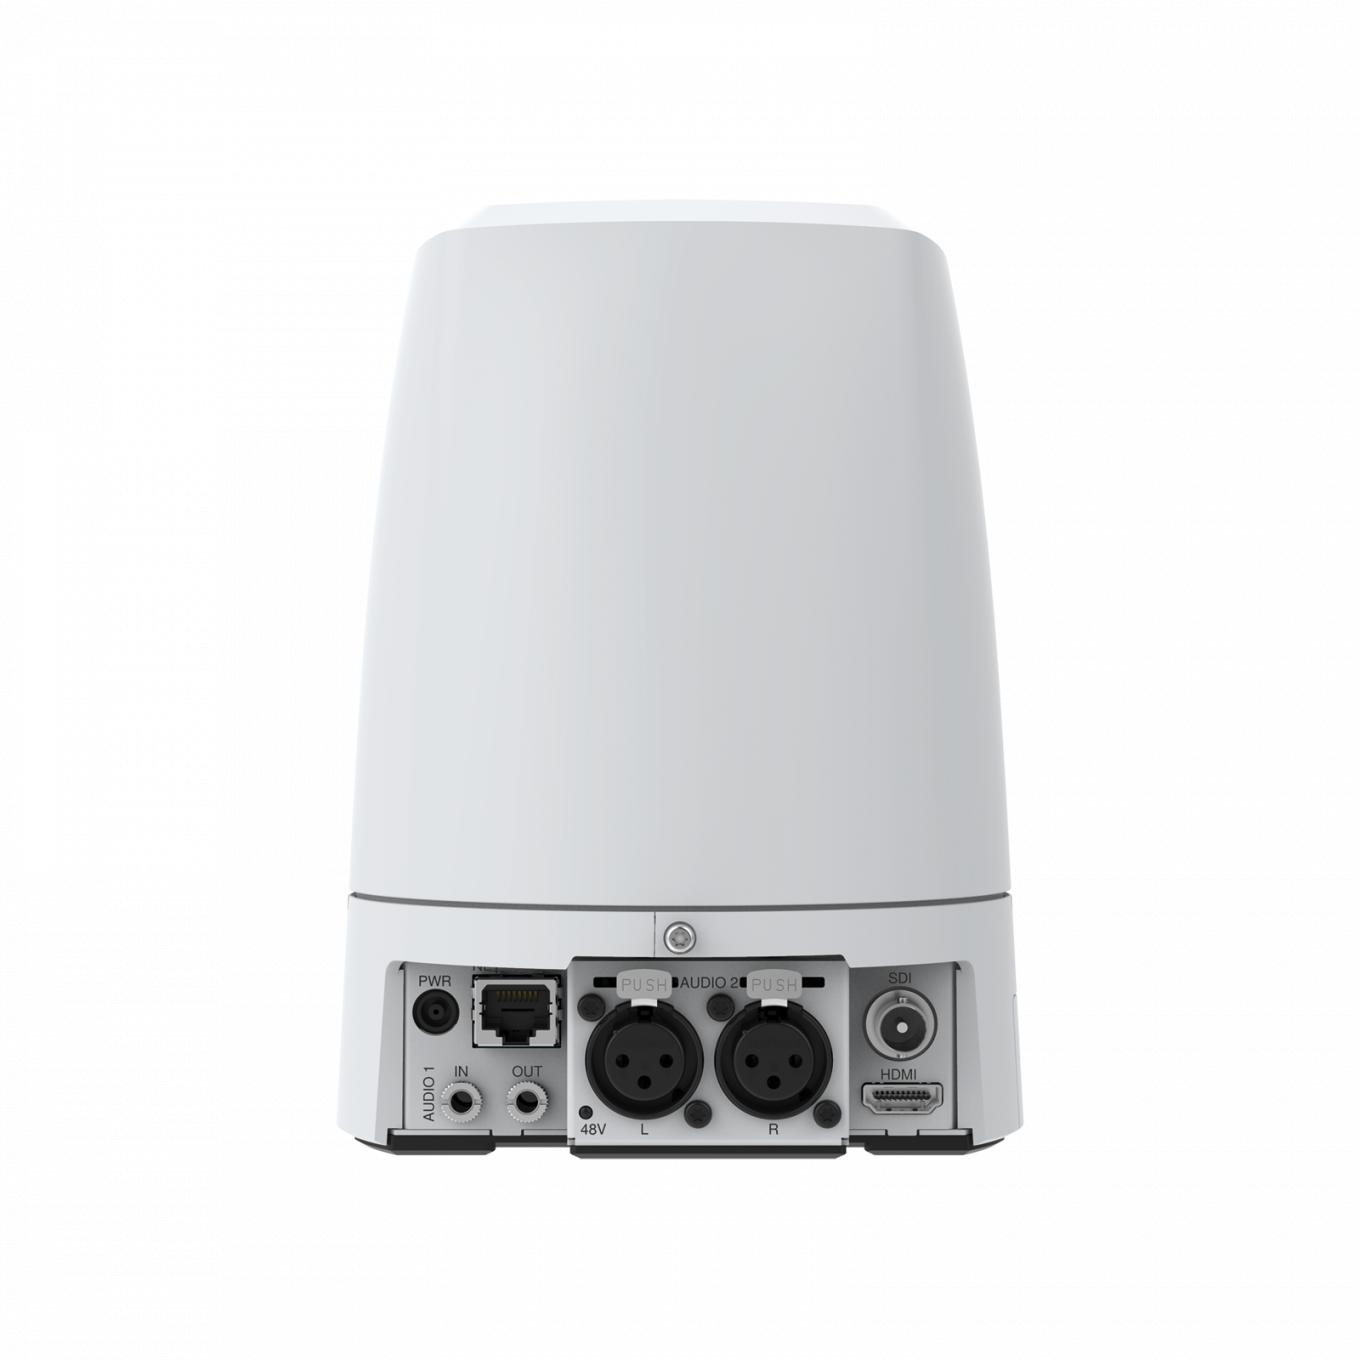 AXIS V5925 PTZ Network Camera | Axis Communications